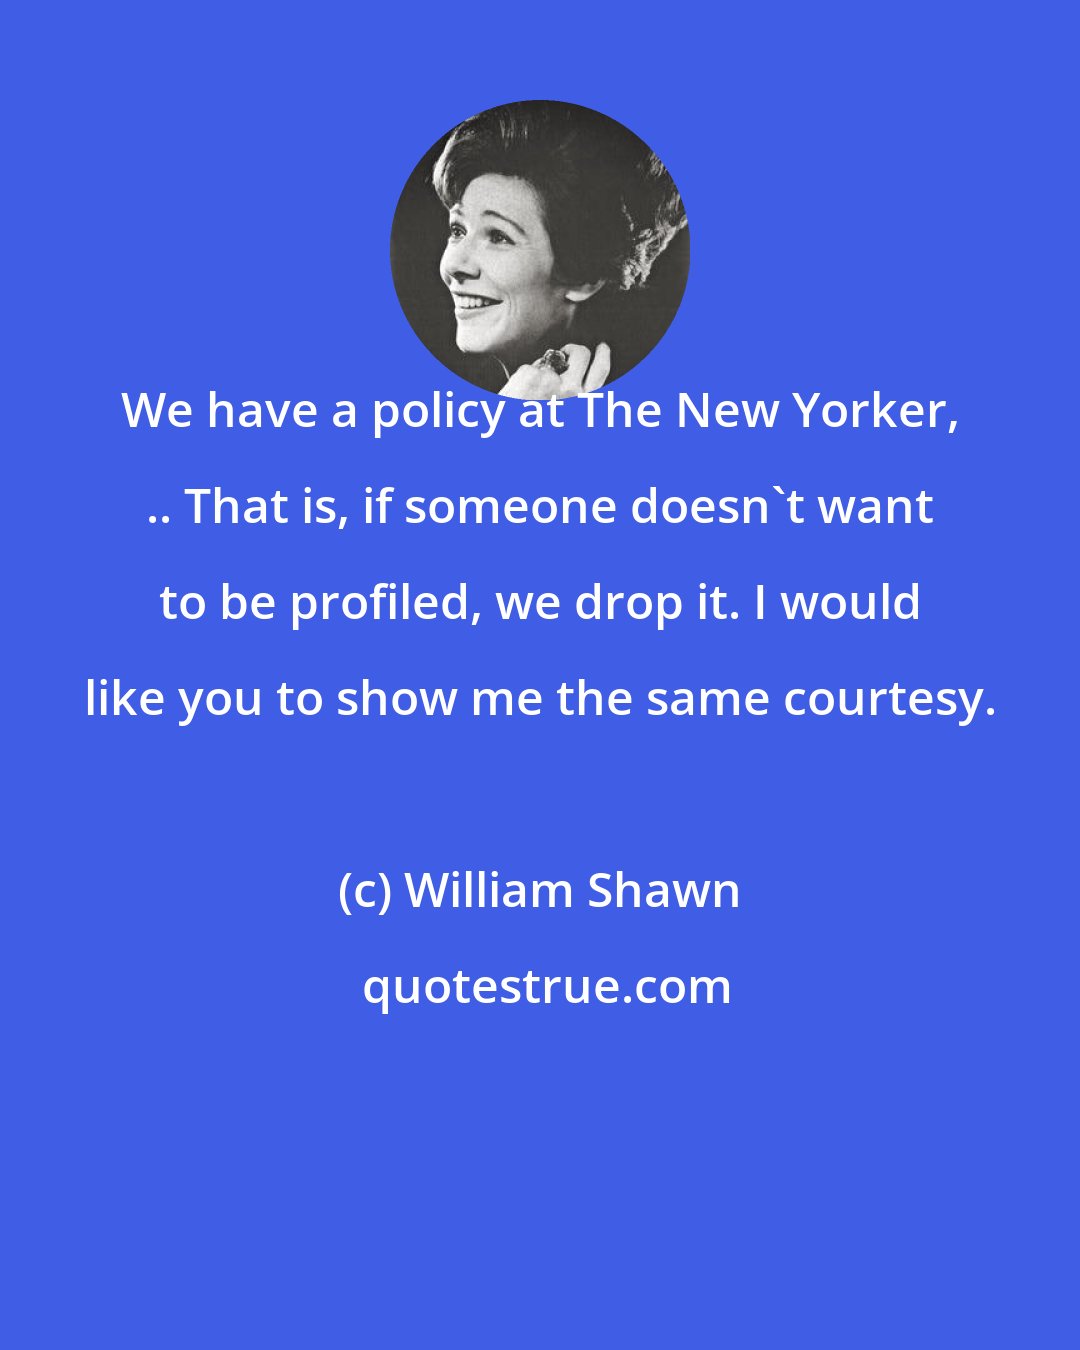 William Shawn: We have a policy at The New Yorker, .. That is, if someone doesn't want to be profiled, we drop it. I would like you to show me the same courtesy.